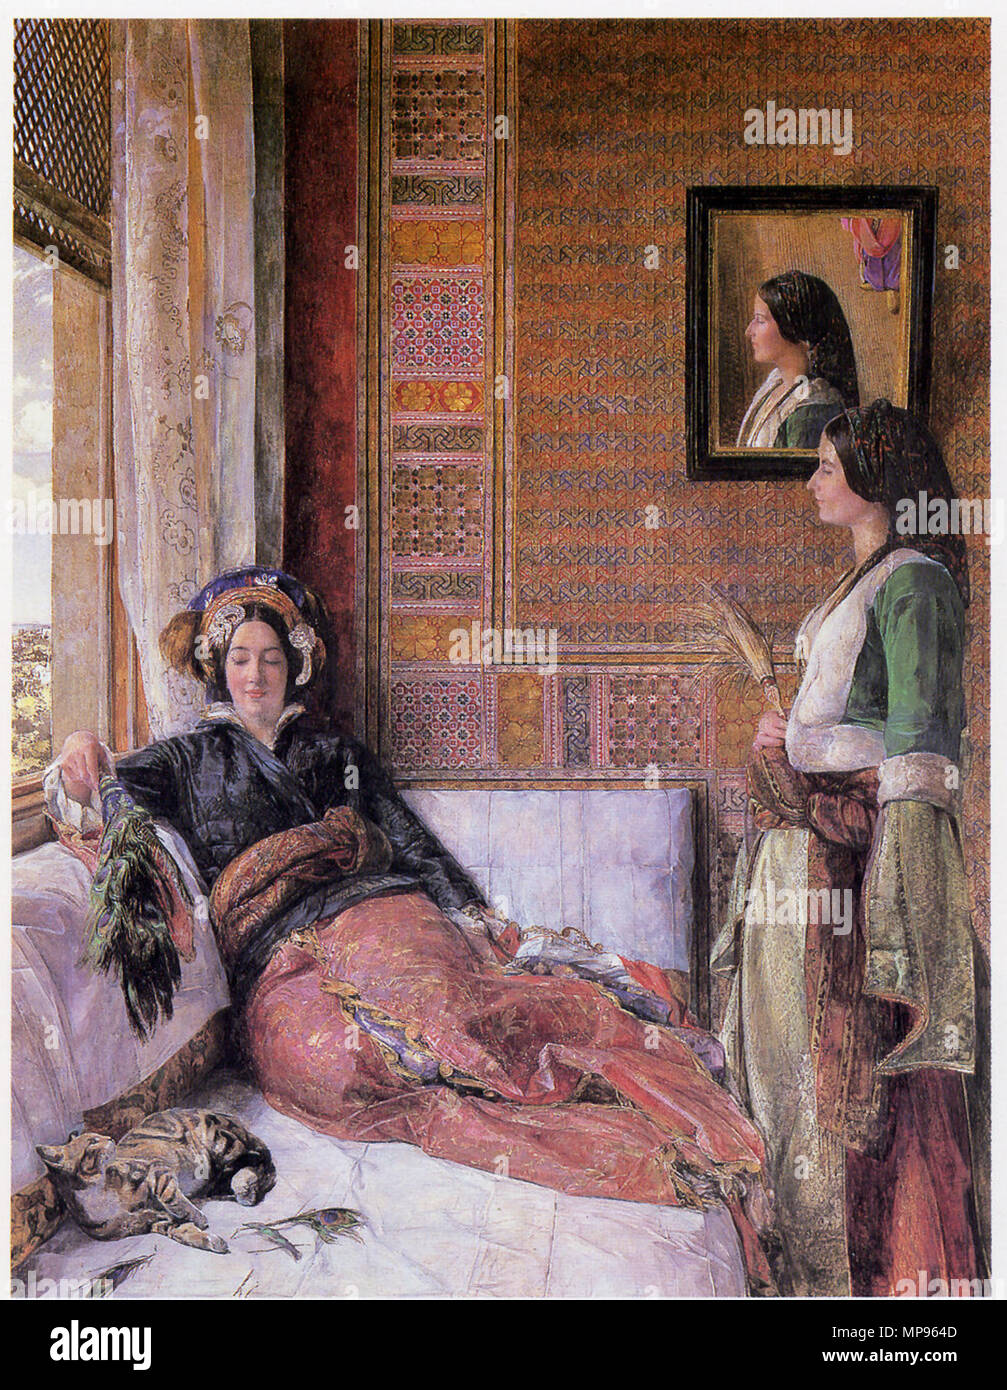 . English: 'Hhareem Life, Constantinople', Watercolor, 18x12 inches, 1857. 1857.   John Frederick Lewis  (1805–1876)     Alternative names J. F. Lewis; John Frederick Lewis (1805-1876); Spanish Lewis; J.F. Lewis  Description British painter and printmaker  Date of birth/death 14 July 1805 15 August 1876  Location of birth/death London Walton-on-Thames  Work location London, Kairo  Authority control  : Q1391078 VIAF: 35335176 ISNI: 0000 0000 6681 7858 ULAN: 500007820 LCCN: nr95029881 NLA: 40125980 WorldCat 732 John Frederick Lewis - Hhareem Life, Constantinople Stock Photo